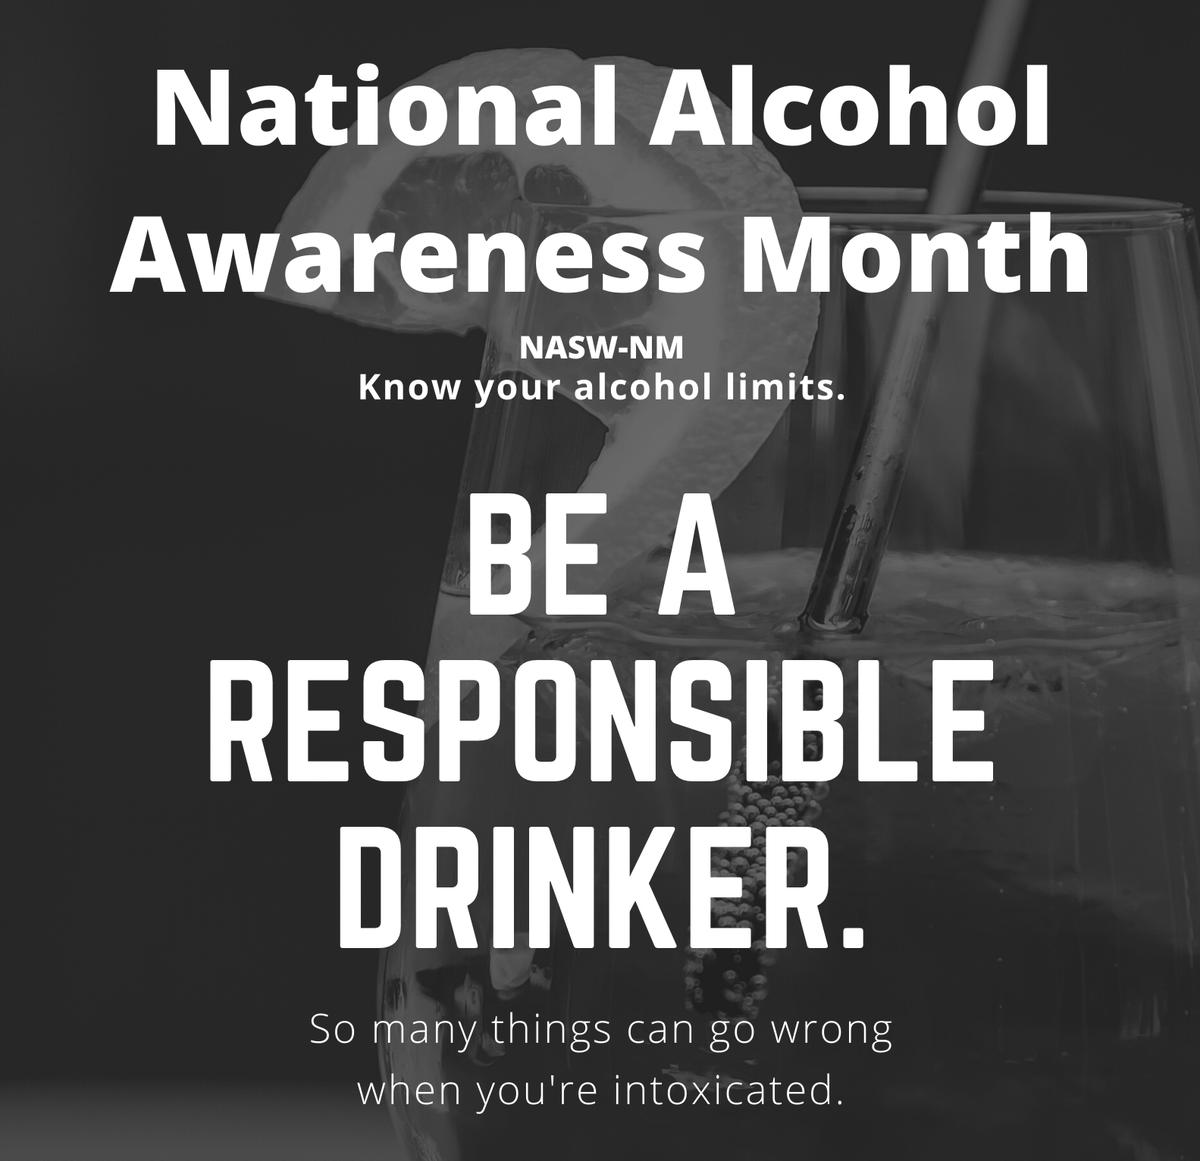 April is #NationalAlcoholAwarenessMonth! 

Stay safe when drinking by taking it slow, drink water, know your limit & respect the limits of others. 

#PracticeHarmReduction